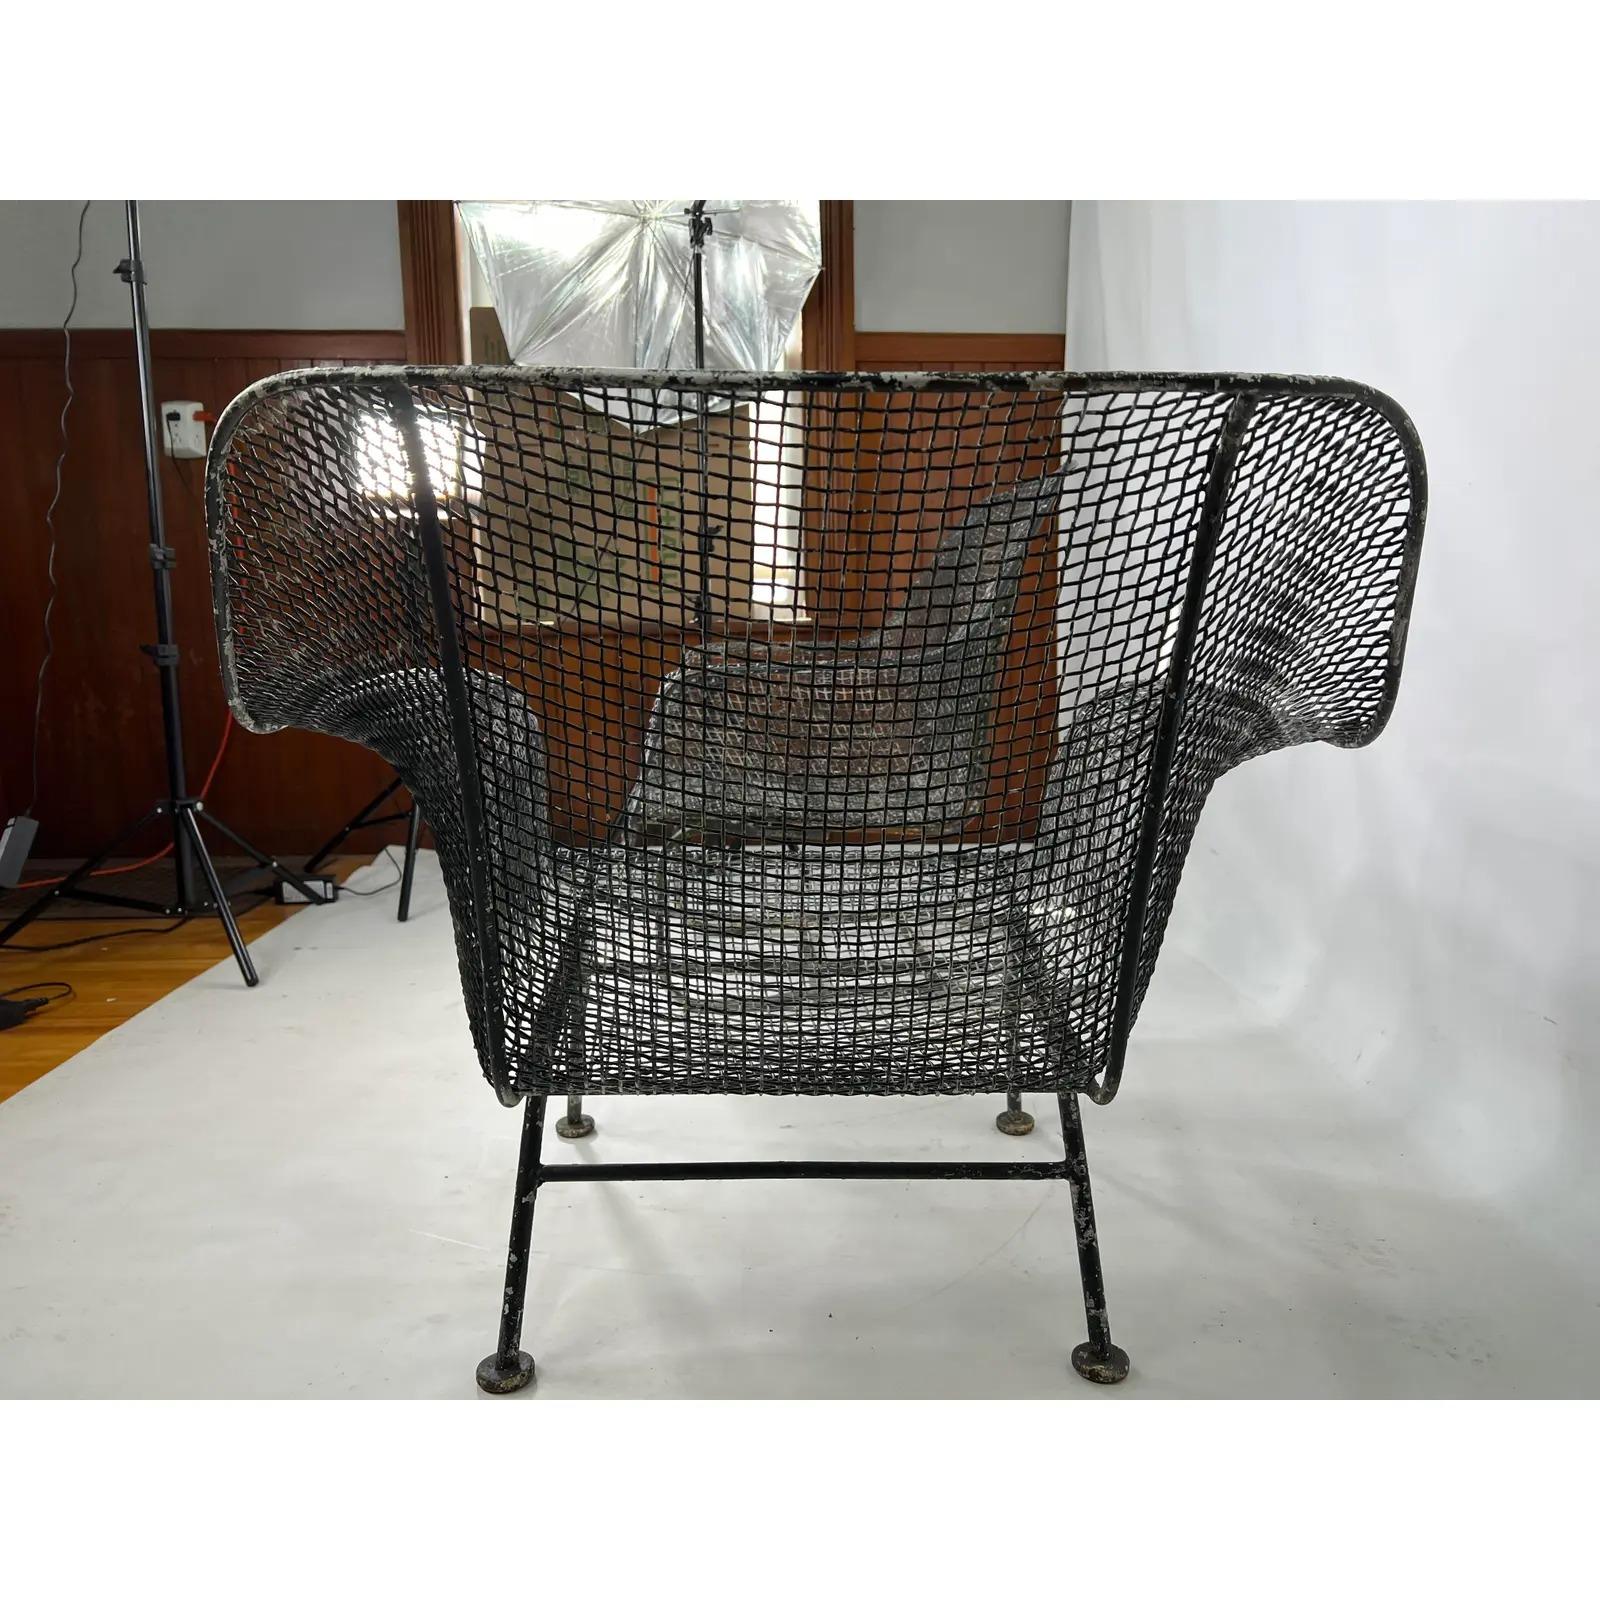 These Russell Woodard lounge chairs are made out of wrought iron with steel and mesh. Included in the set is a standard lounge chair and a spring chair. The measurements for the chair without spring are: 33” W 22” D 27.25” H.